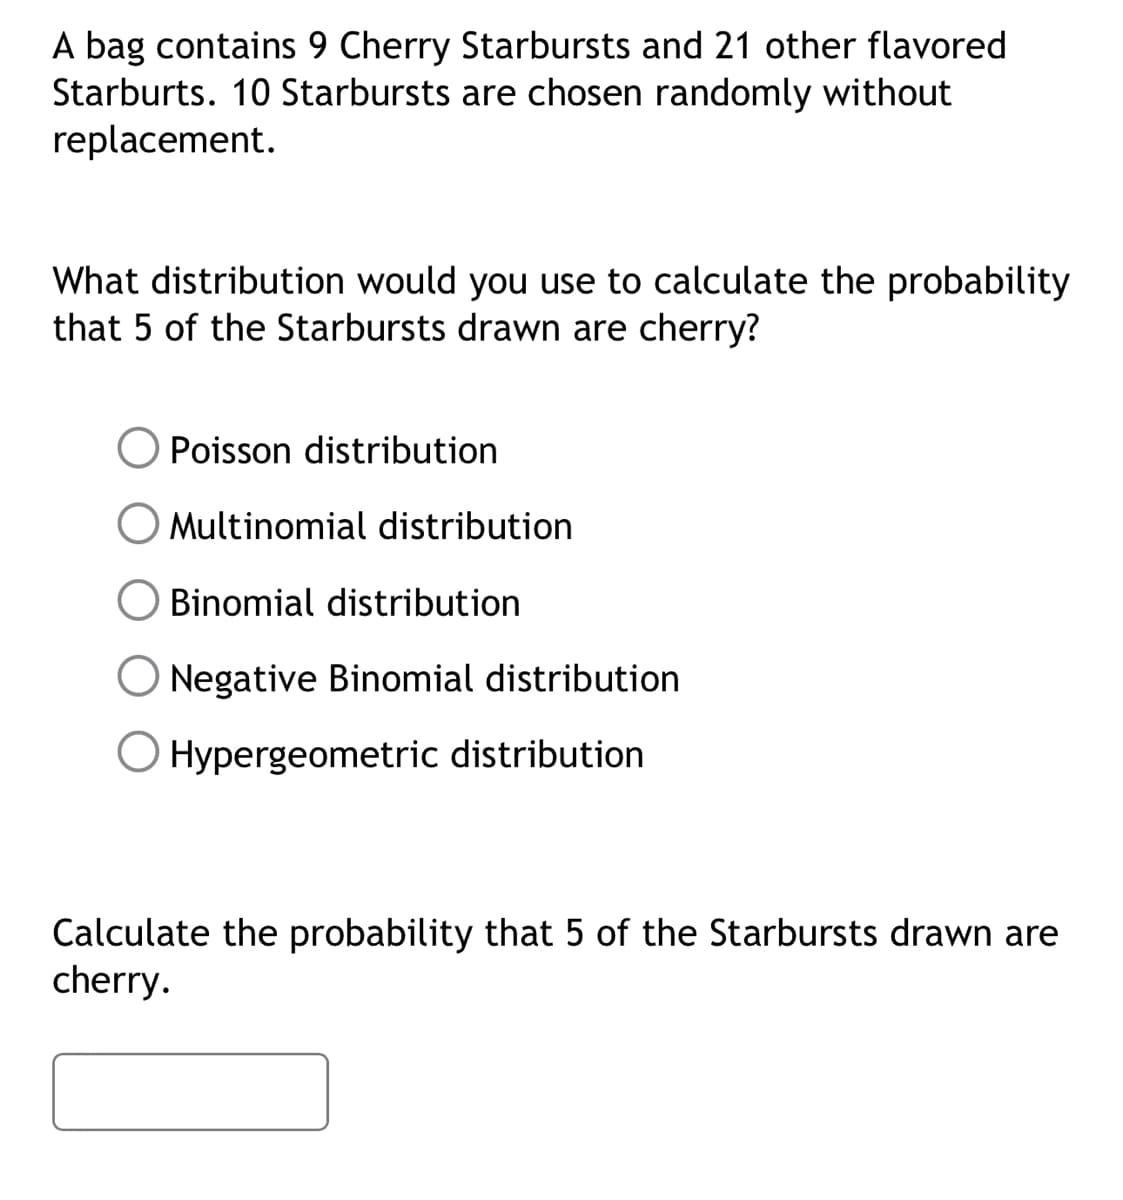 A bag contains 9 Cherry Starbursts and 21 other flavored
Starburts. 10 Starbursts are chosen randomly without
replacement.
What distribution would you use to calculate the probability
that 5 of the Starbursts drawn are cherry?
Poisson distribution
Multinomial distribution
Binomial distribution
Negative Binomial distribution
Hypergeometric distribution
Calculate the probability that 5 of the Starbursts drawn are
cherry.